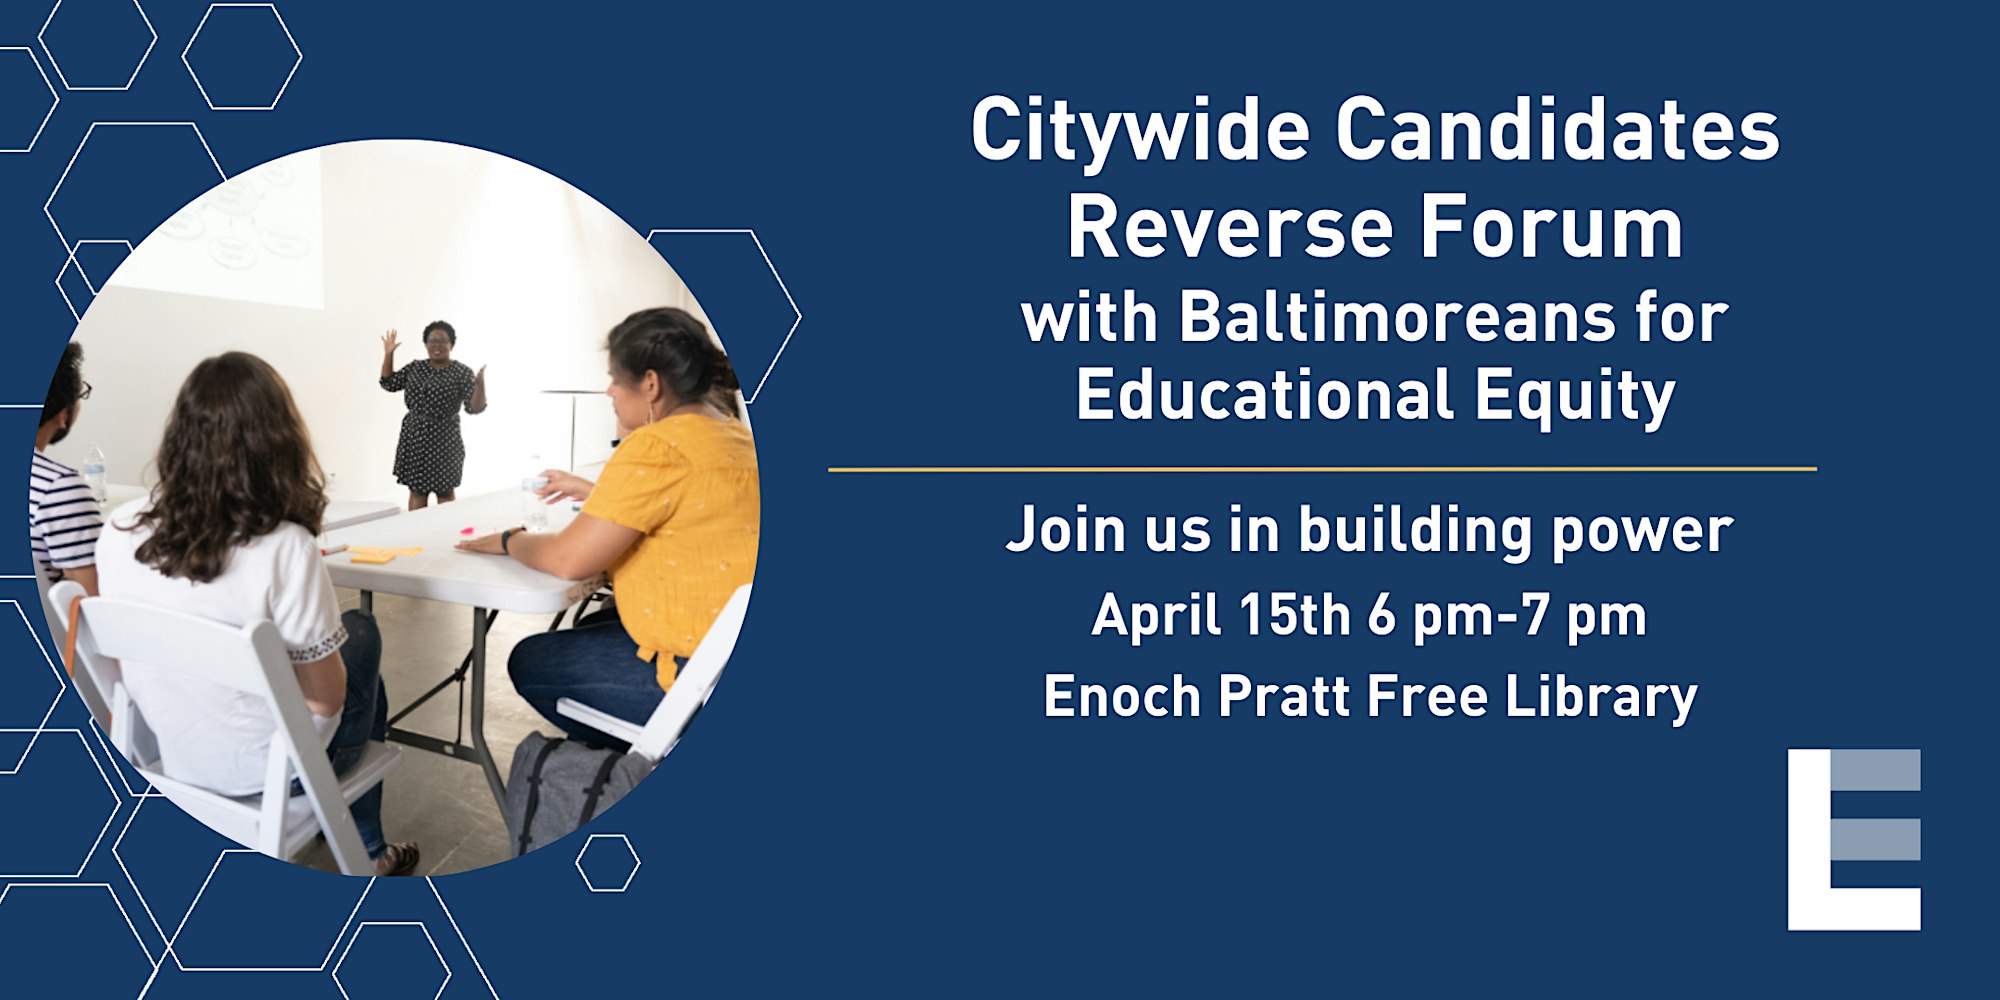 Citywide Candidates Reverse Forum with BEE April 15th 6pm-7pm